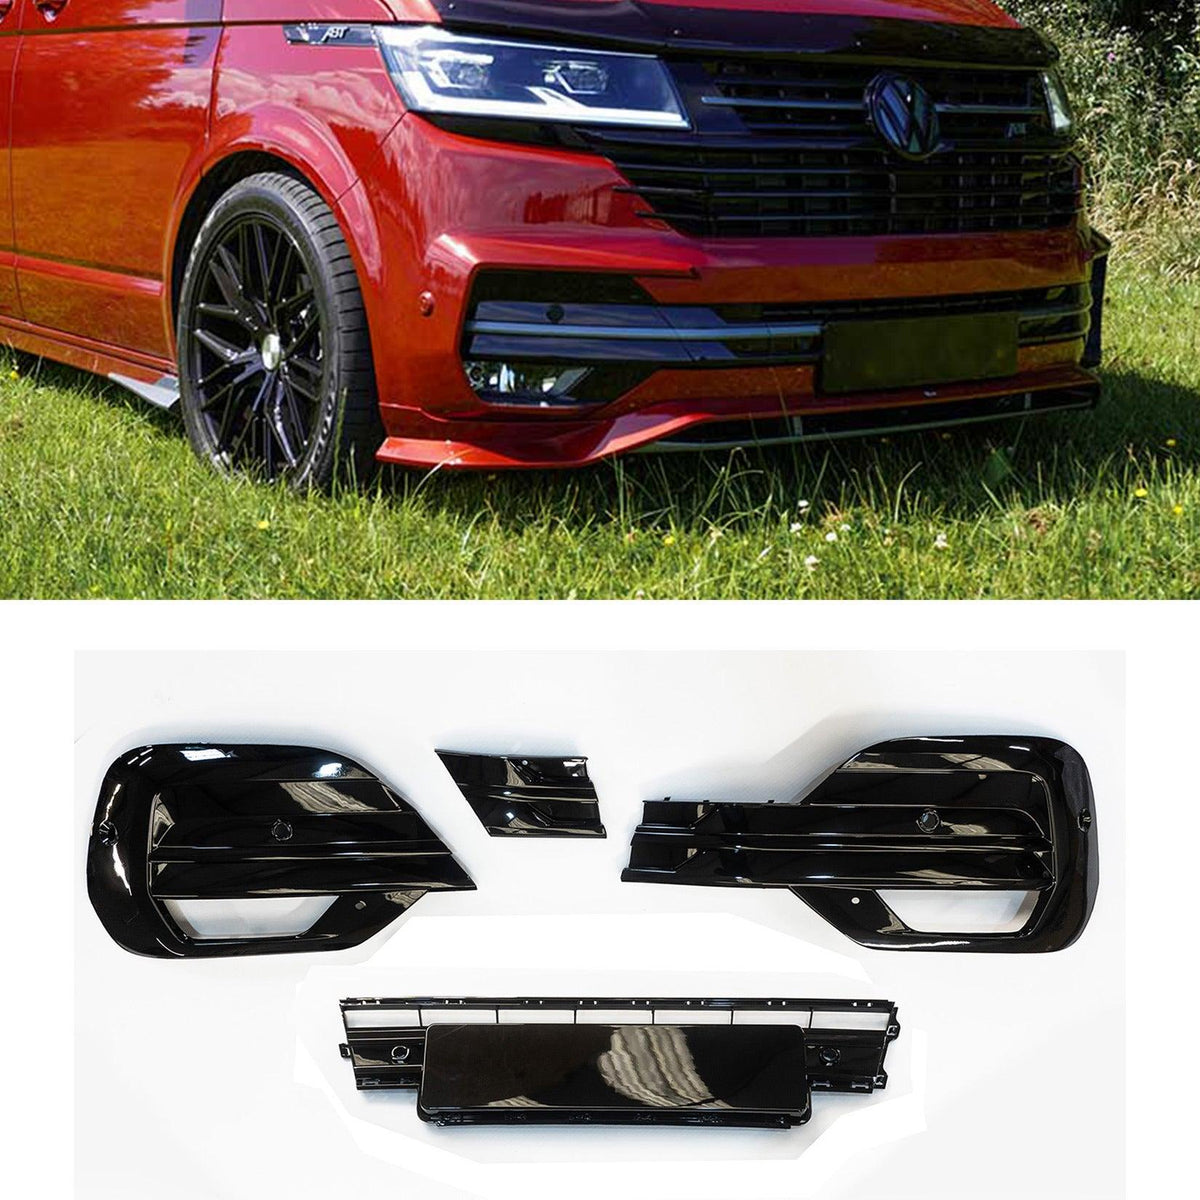 VW TRANSPORTER T6.1 2019 ON REPLACEMENT LOWER FRONT GRILL KIT – GLOSS BLACK - Storm Xccessories2